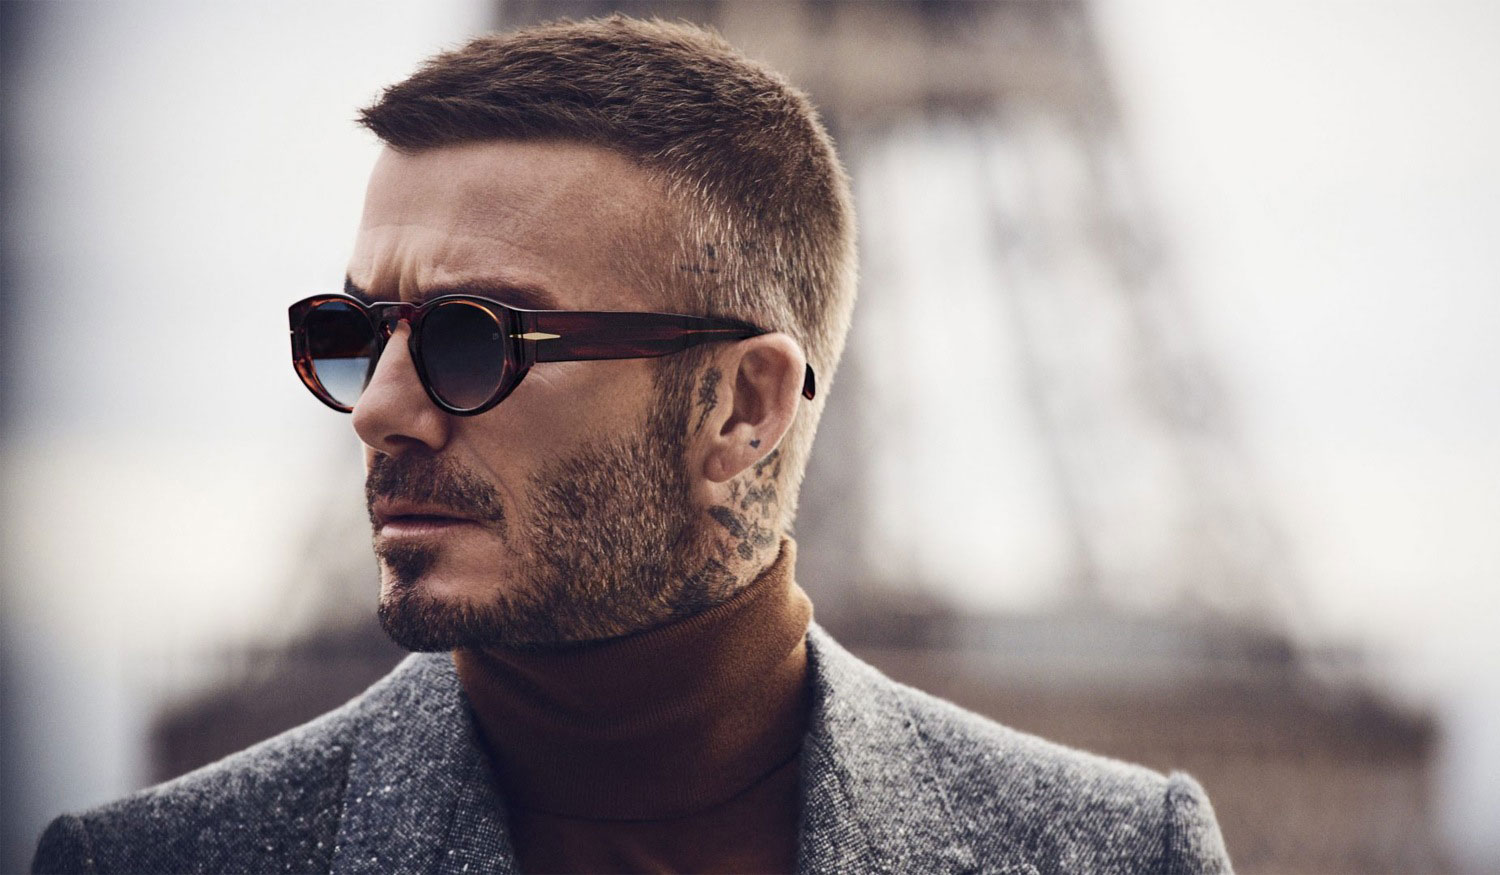 The Top 6 Haircuts for Men